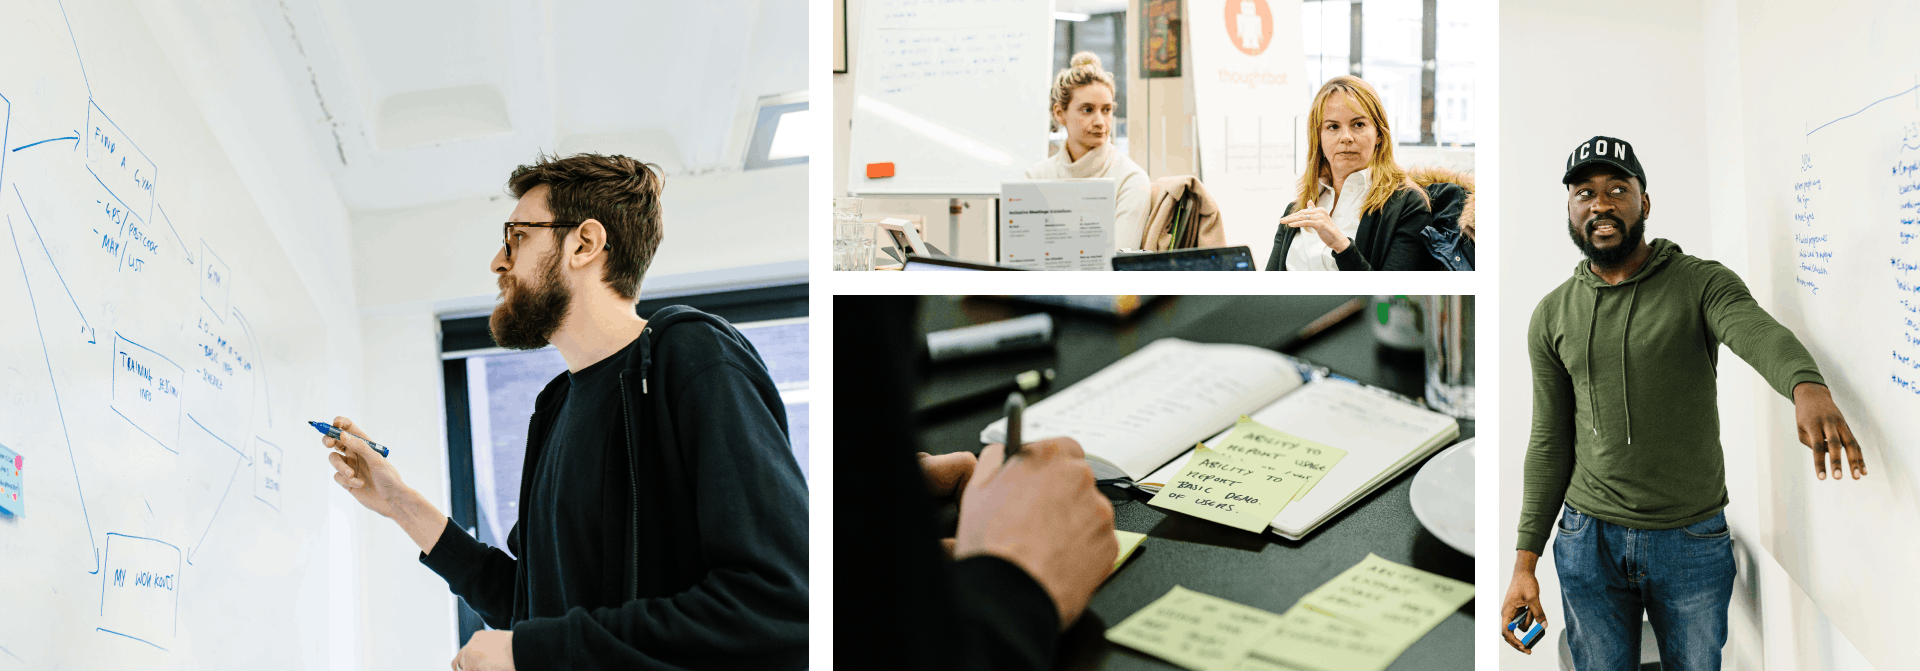 Four photos of the Steel Warriors workshop; a designer drawing on a whiteboard, two people at a meeting room table, someone writing on a post-it, a designer looking and pointing at a whiteboard